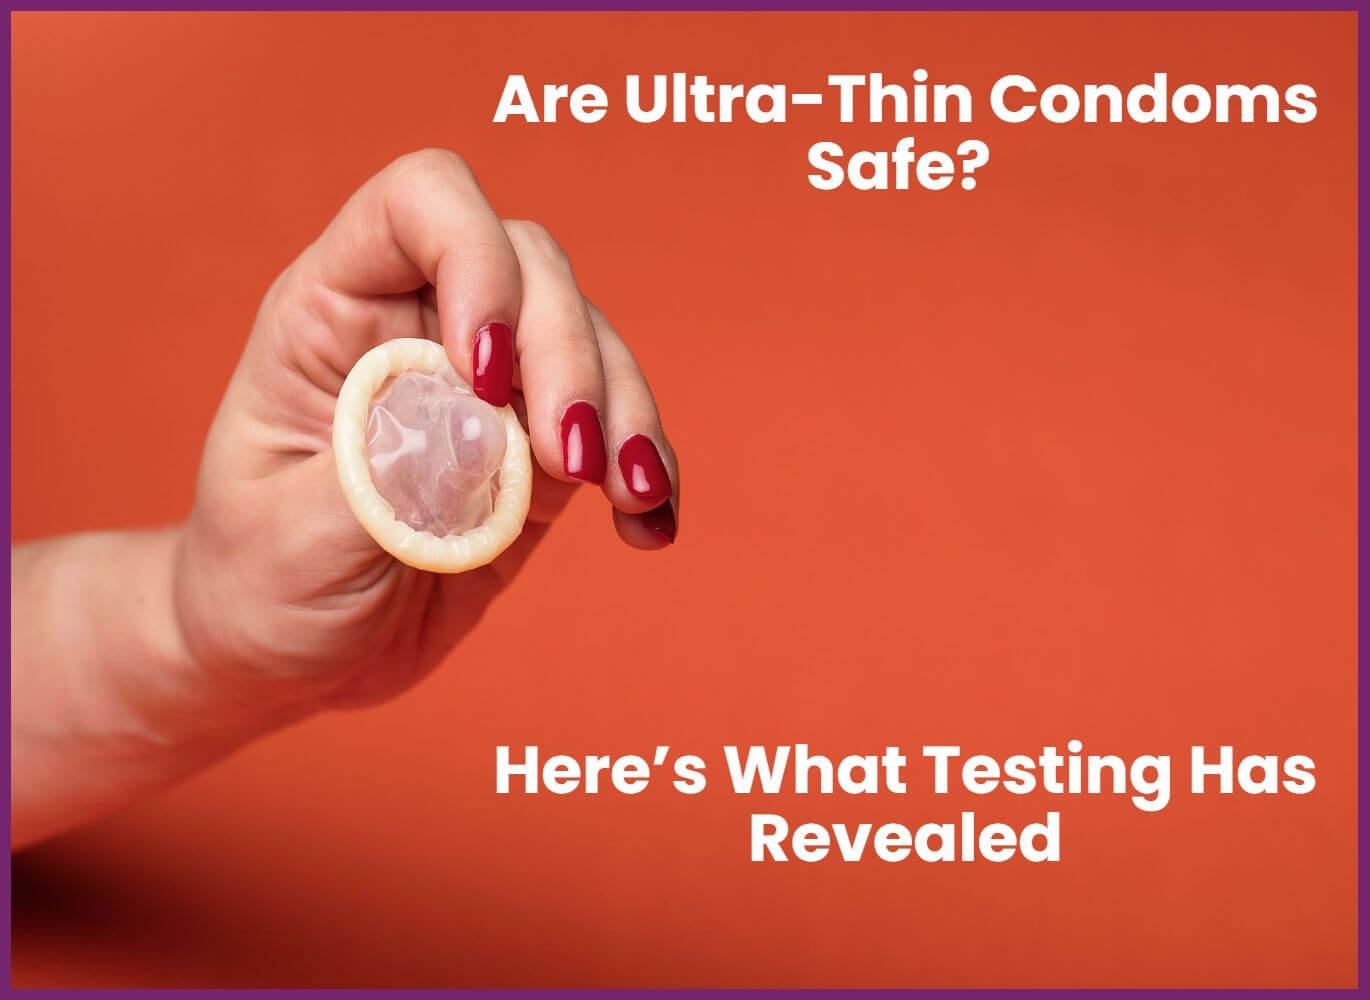 Are Ultra-Thin Condoms Safe? (Here’s What Testing Has Revealed...)